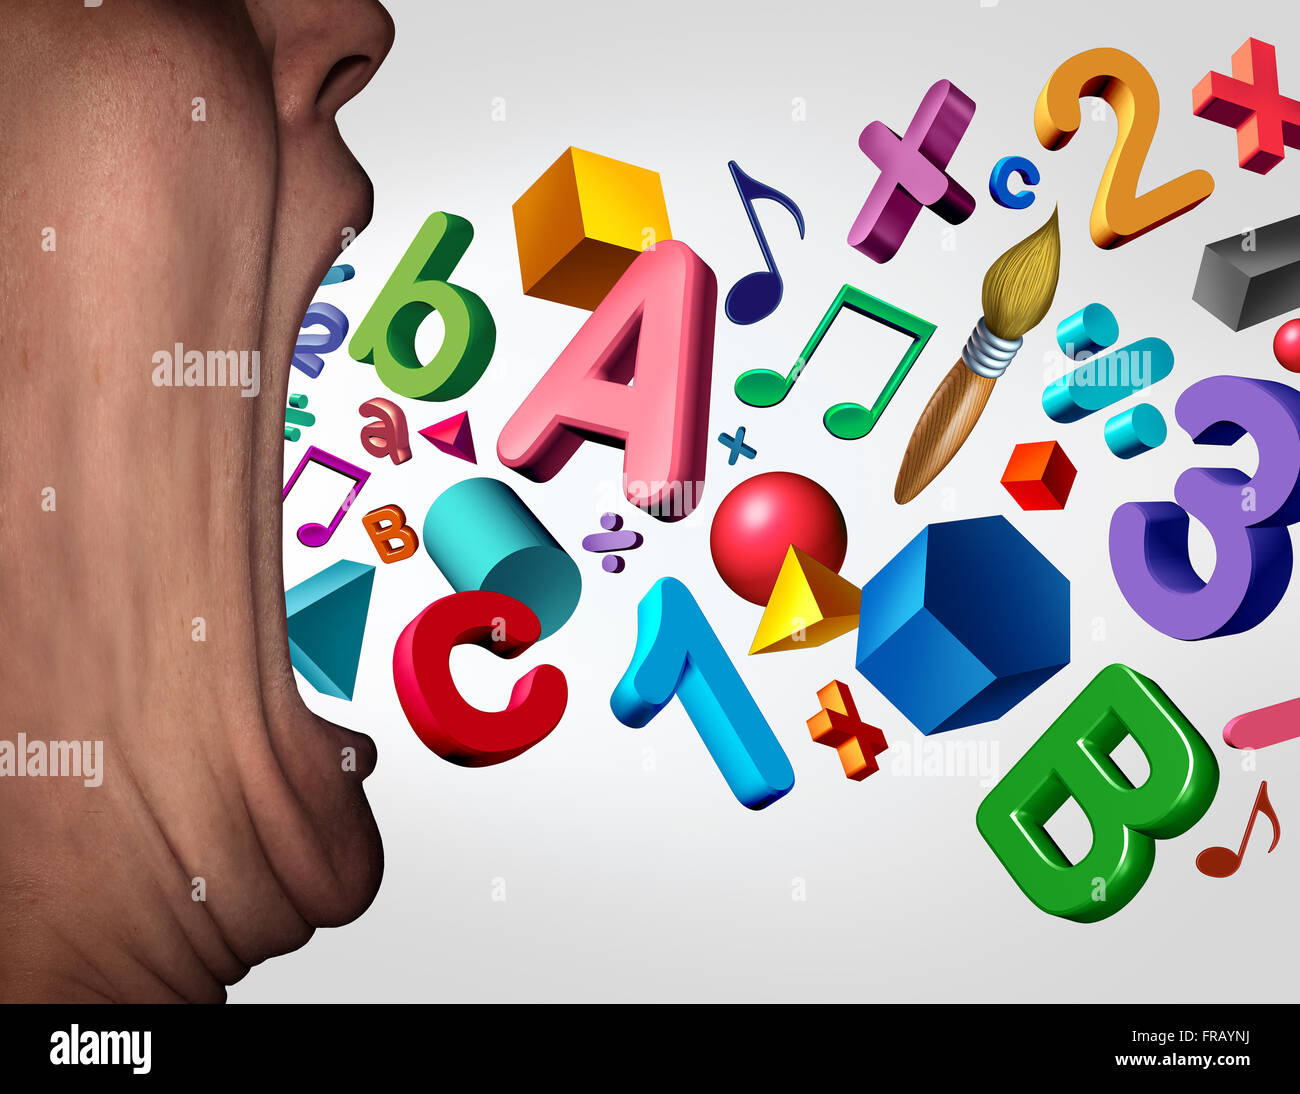 Concept of teaching and learning symbol as a teacher with a wide open mouth with numbers letters music notes and geometry shapes emerging out as a school and instructor tutoring communication to students. Stock Photo